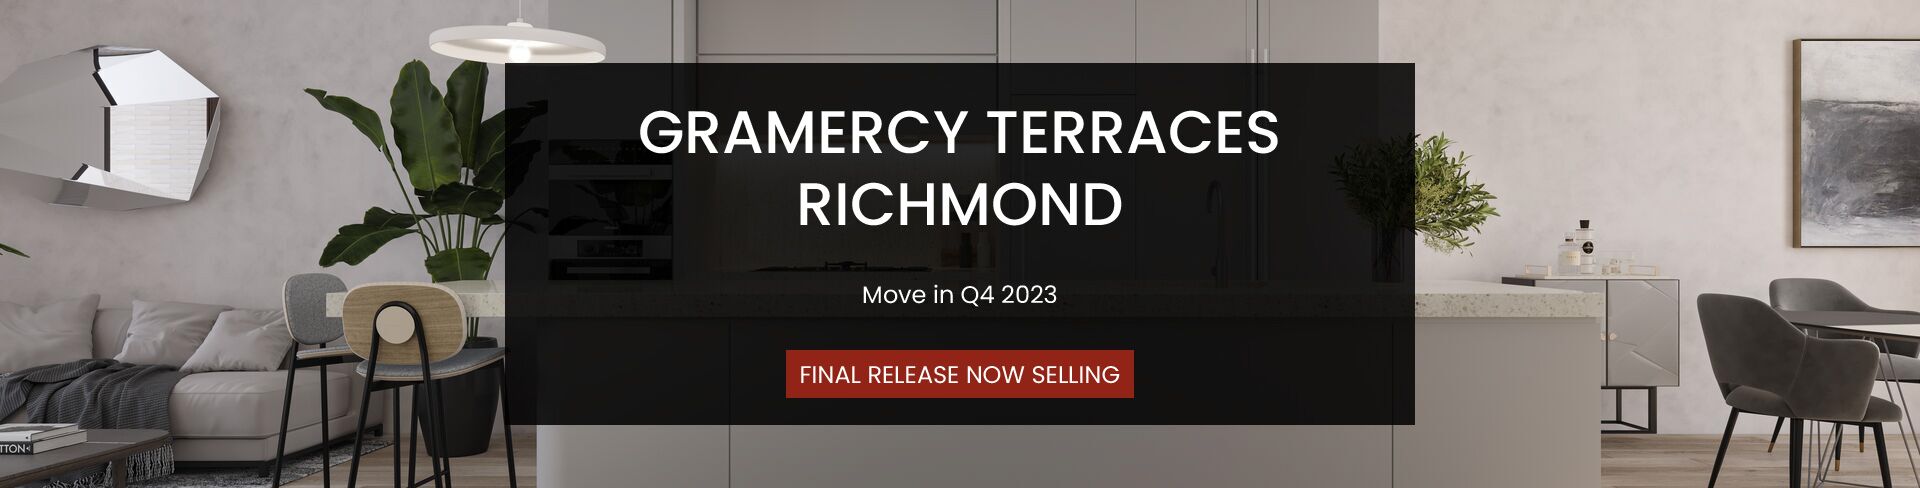 Gramercy Terraces click to view properties for sale banner